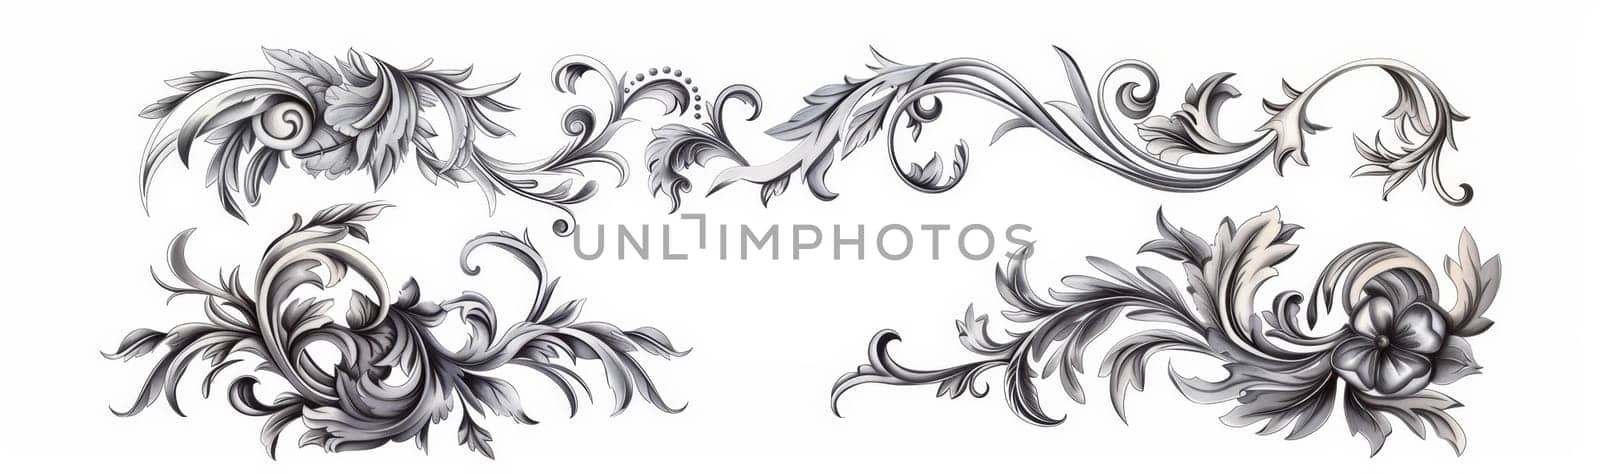 Elegant black and white illustration of symmetrical flourish designs with intricate patterns and swirls. by sfinks